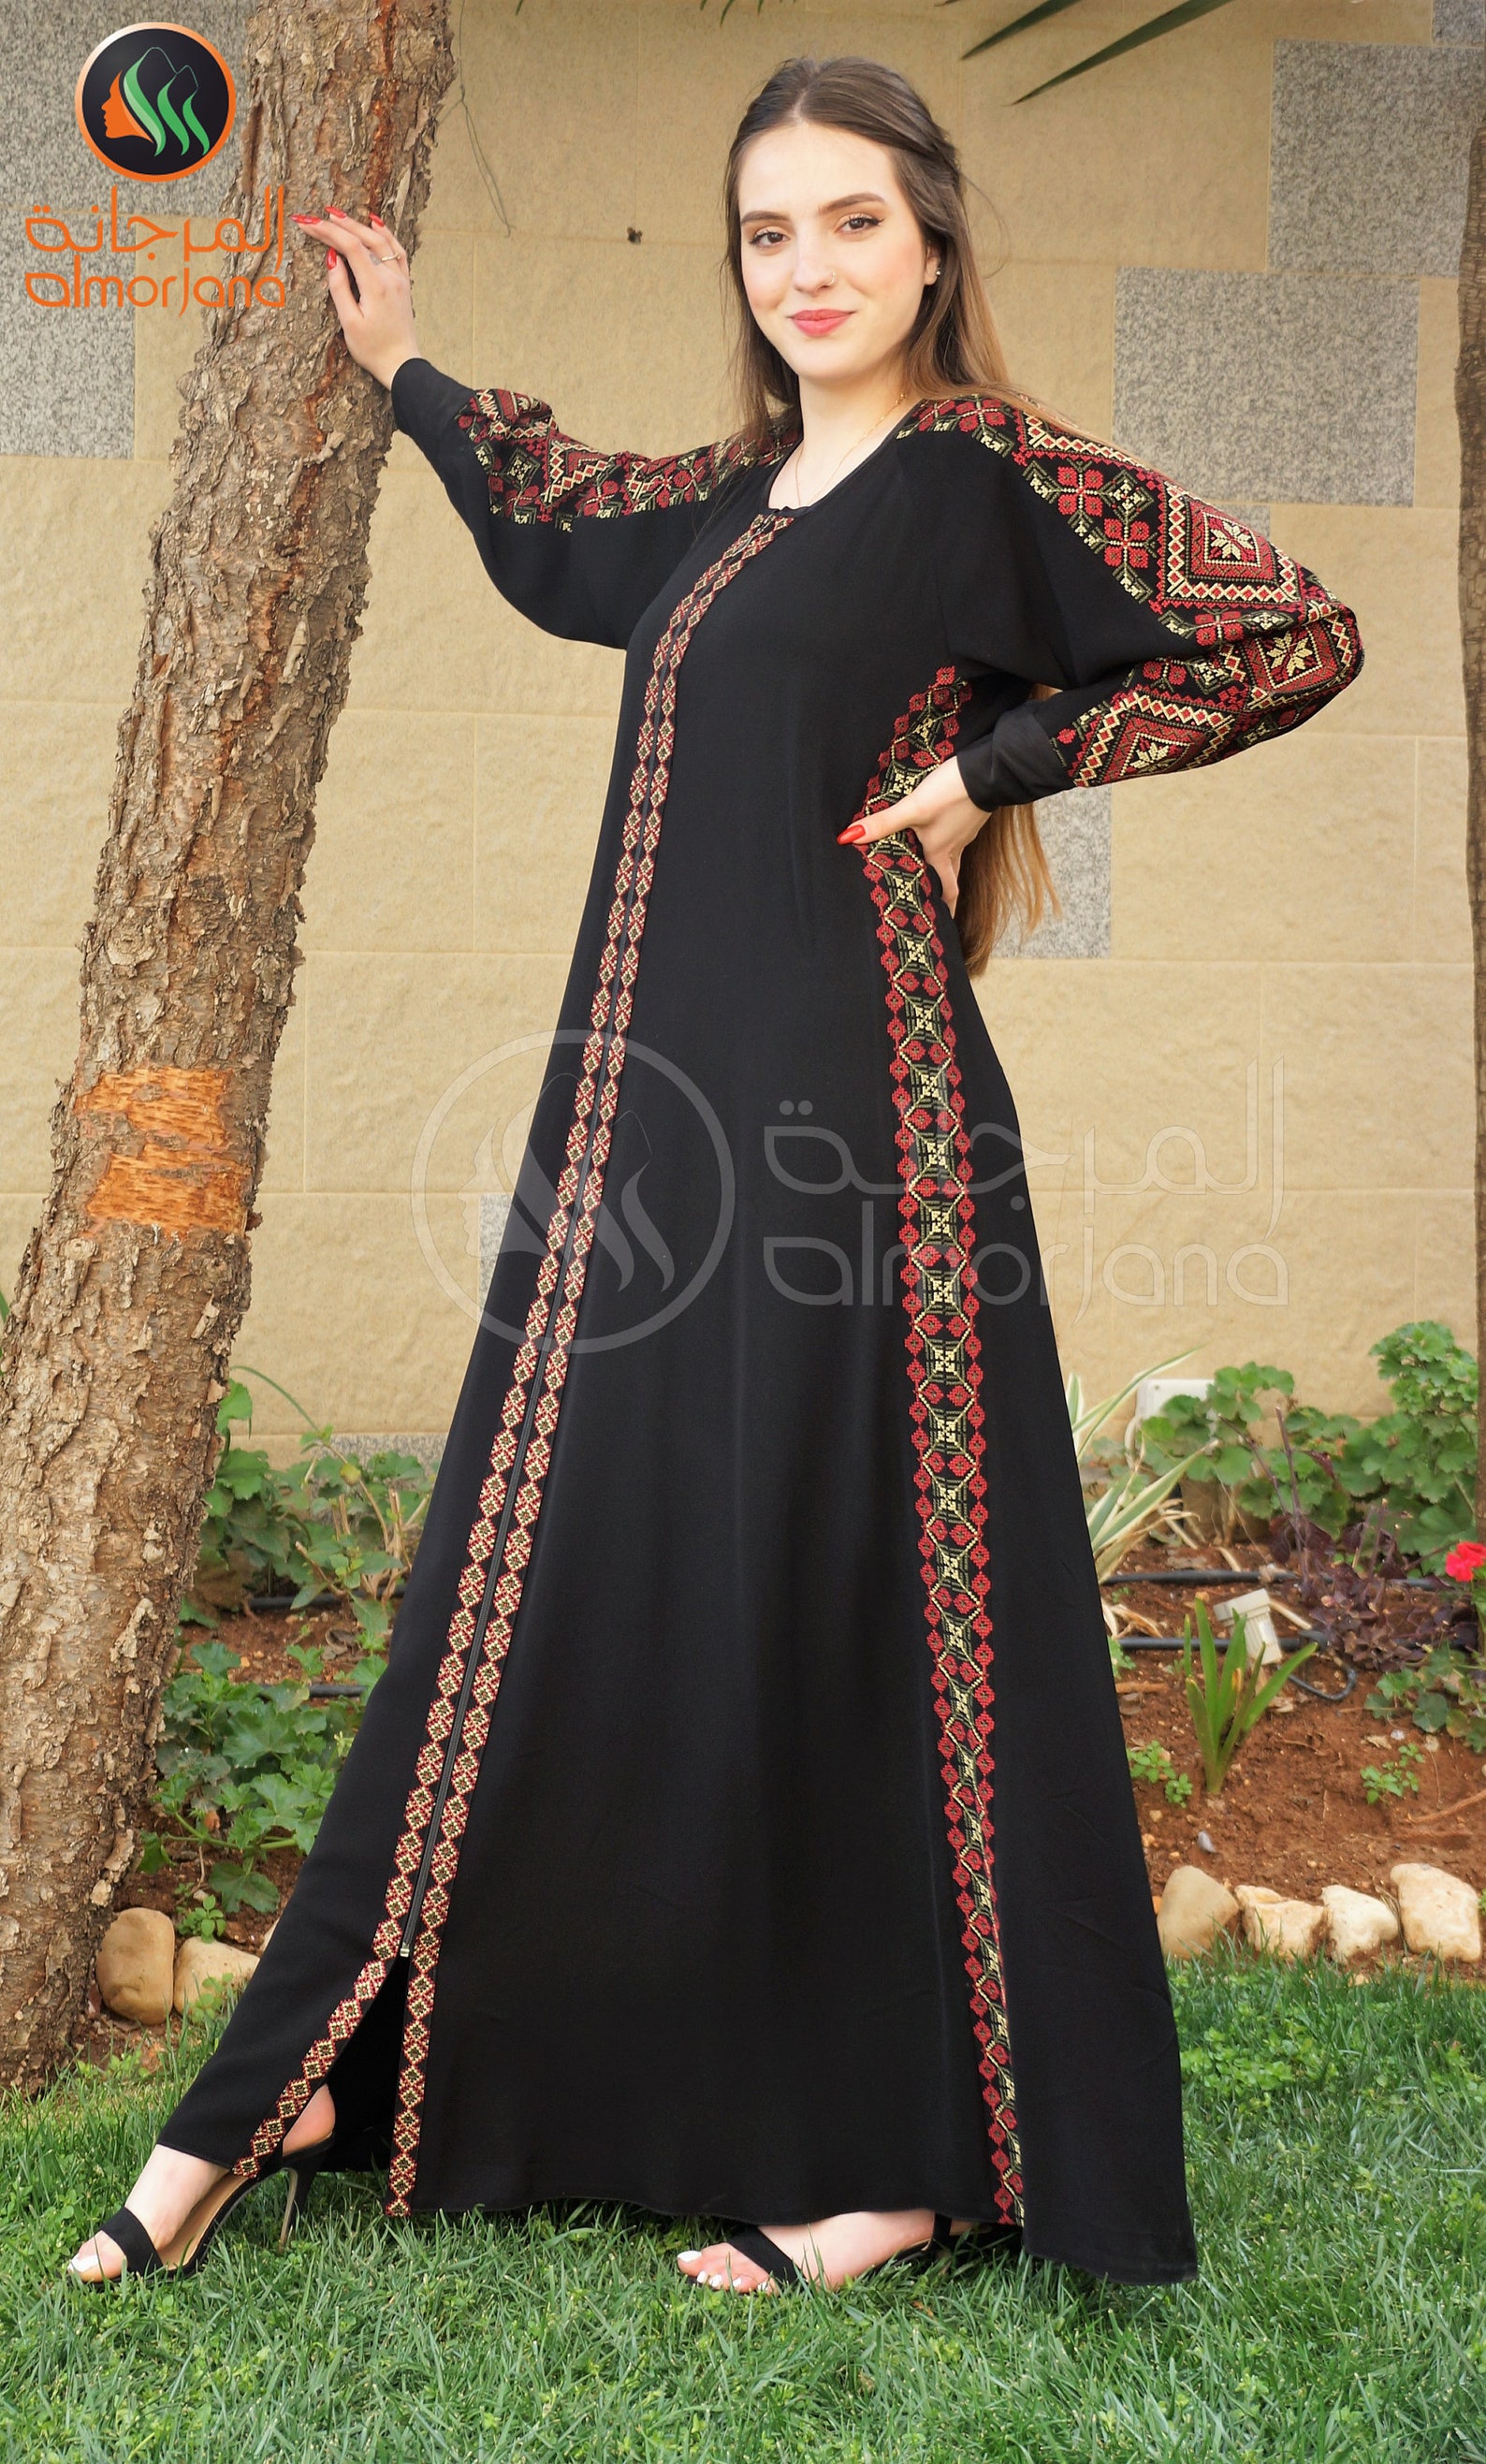 Black Embroidered Abaya with Palestinian embroidery design | Etsy